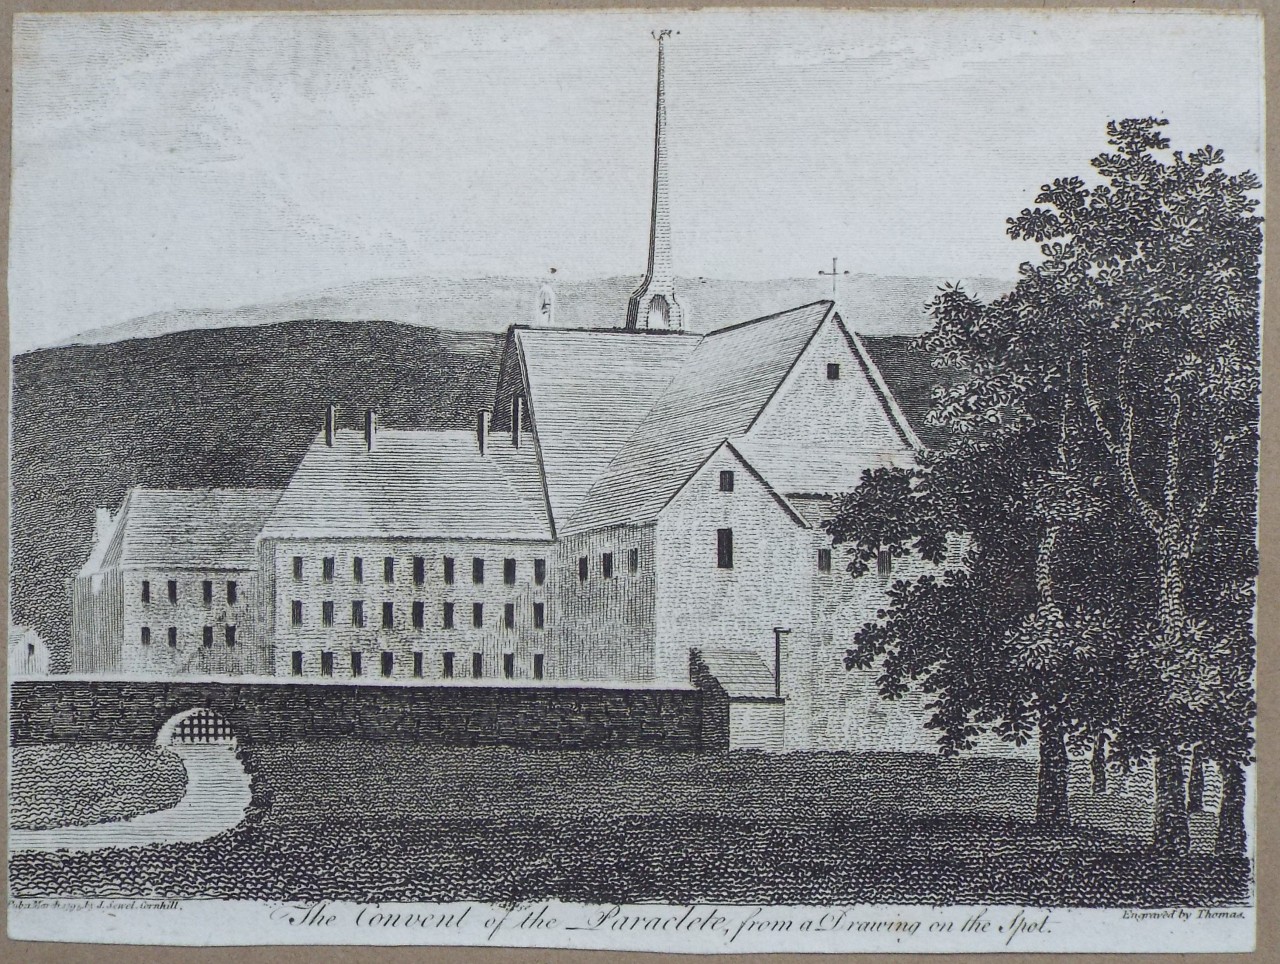 Print - The Convent of the Paraclete, from a Drawing on the Spot. - 